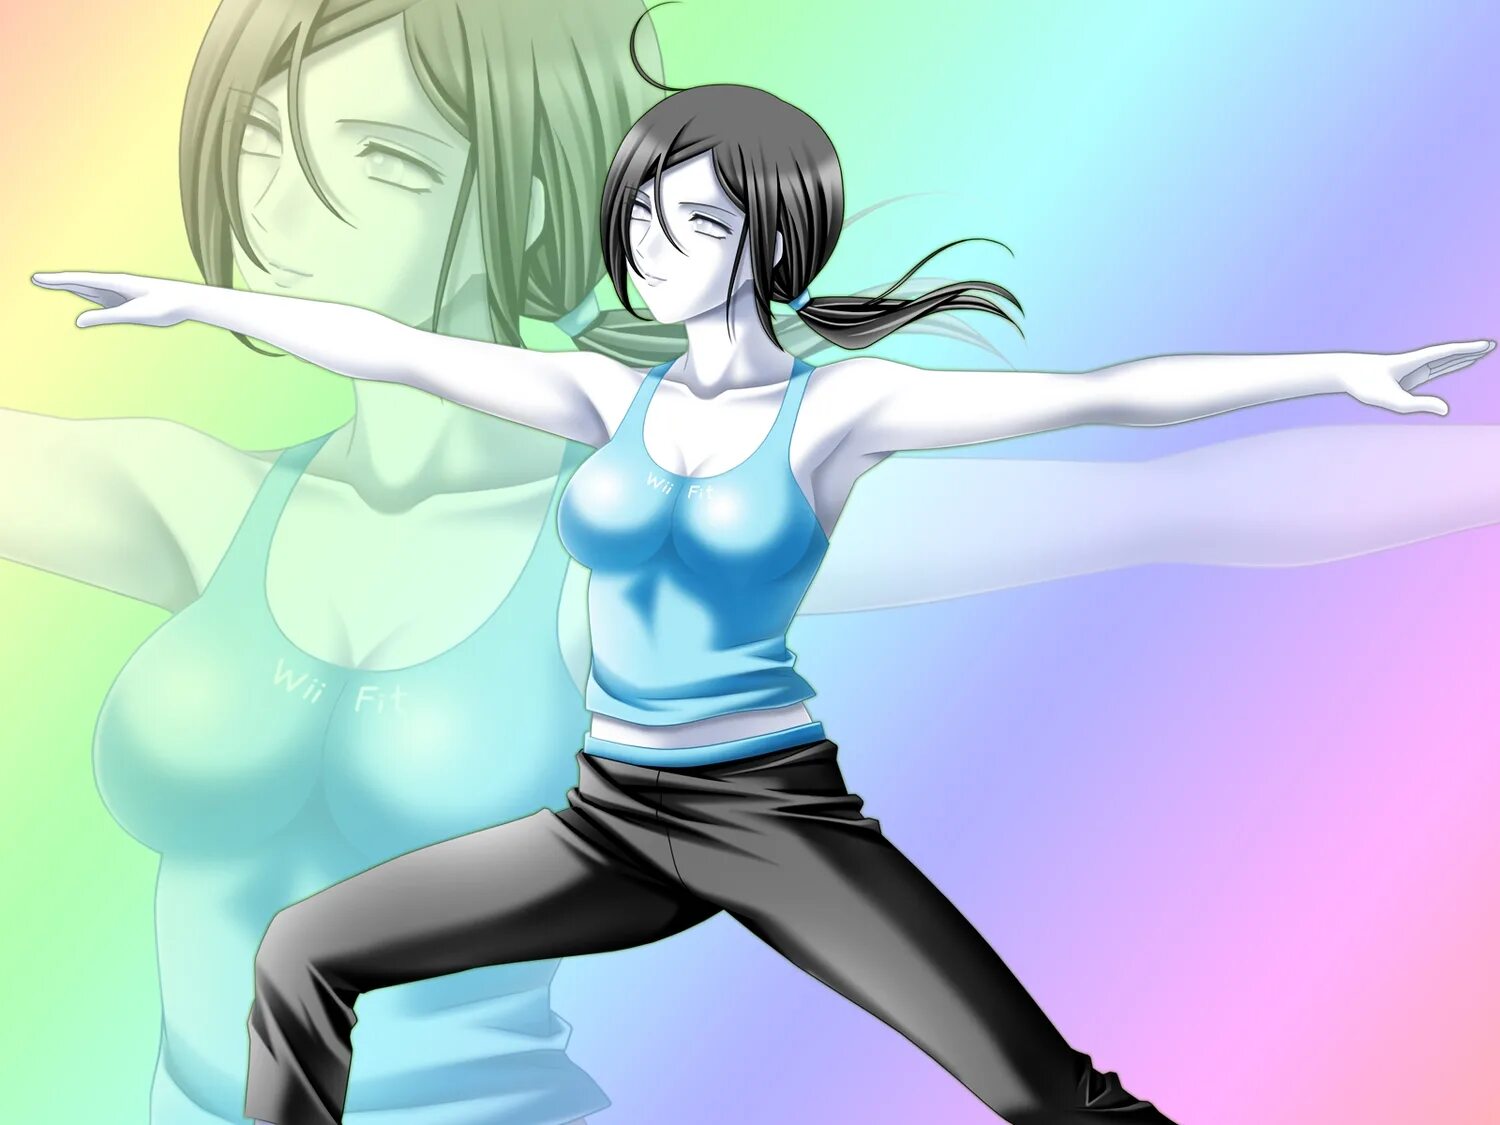 Wii fit. Nintendo Wii Fit Trainer. Нинтендо Wii Fit тренер. Wii Fit Trainer 34. Samus Aran and Wii Fit Trainer.